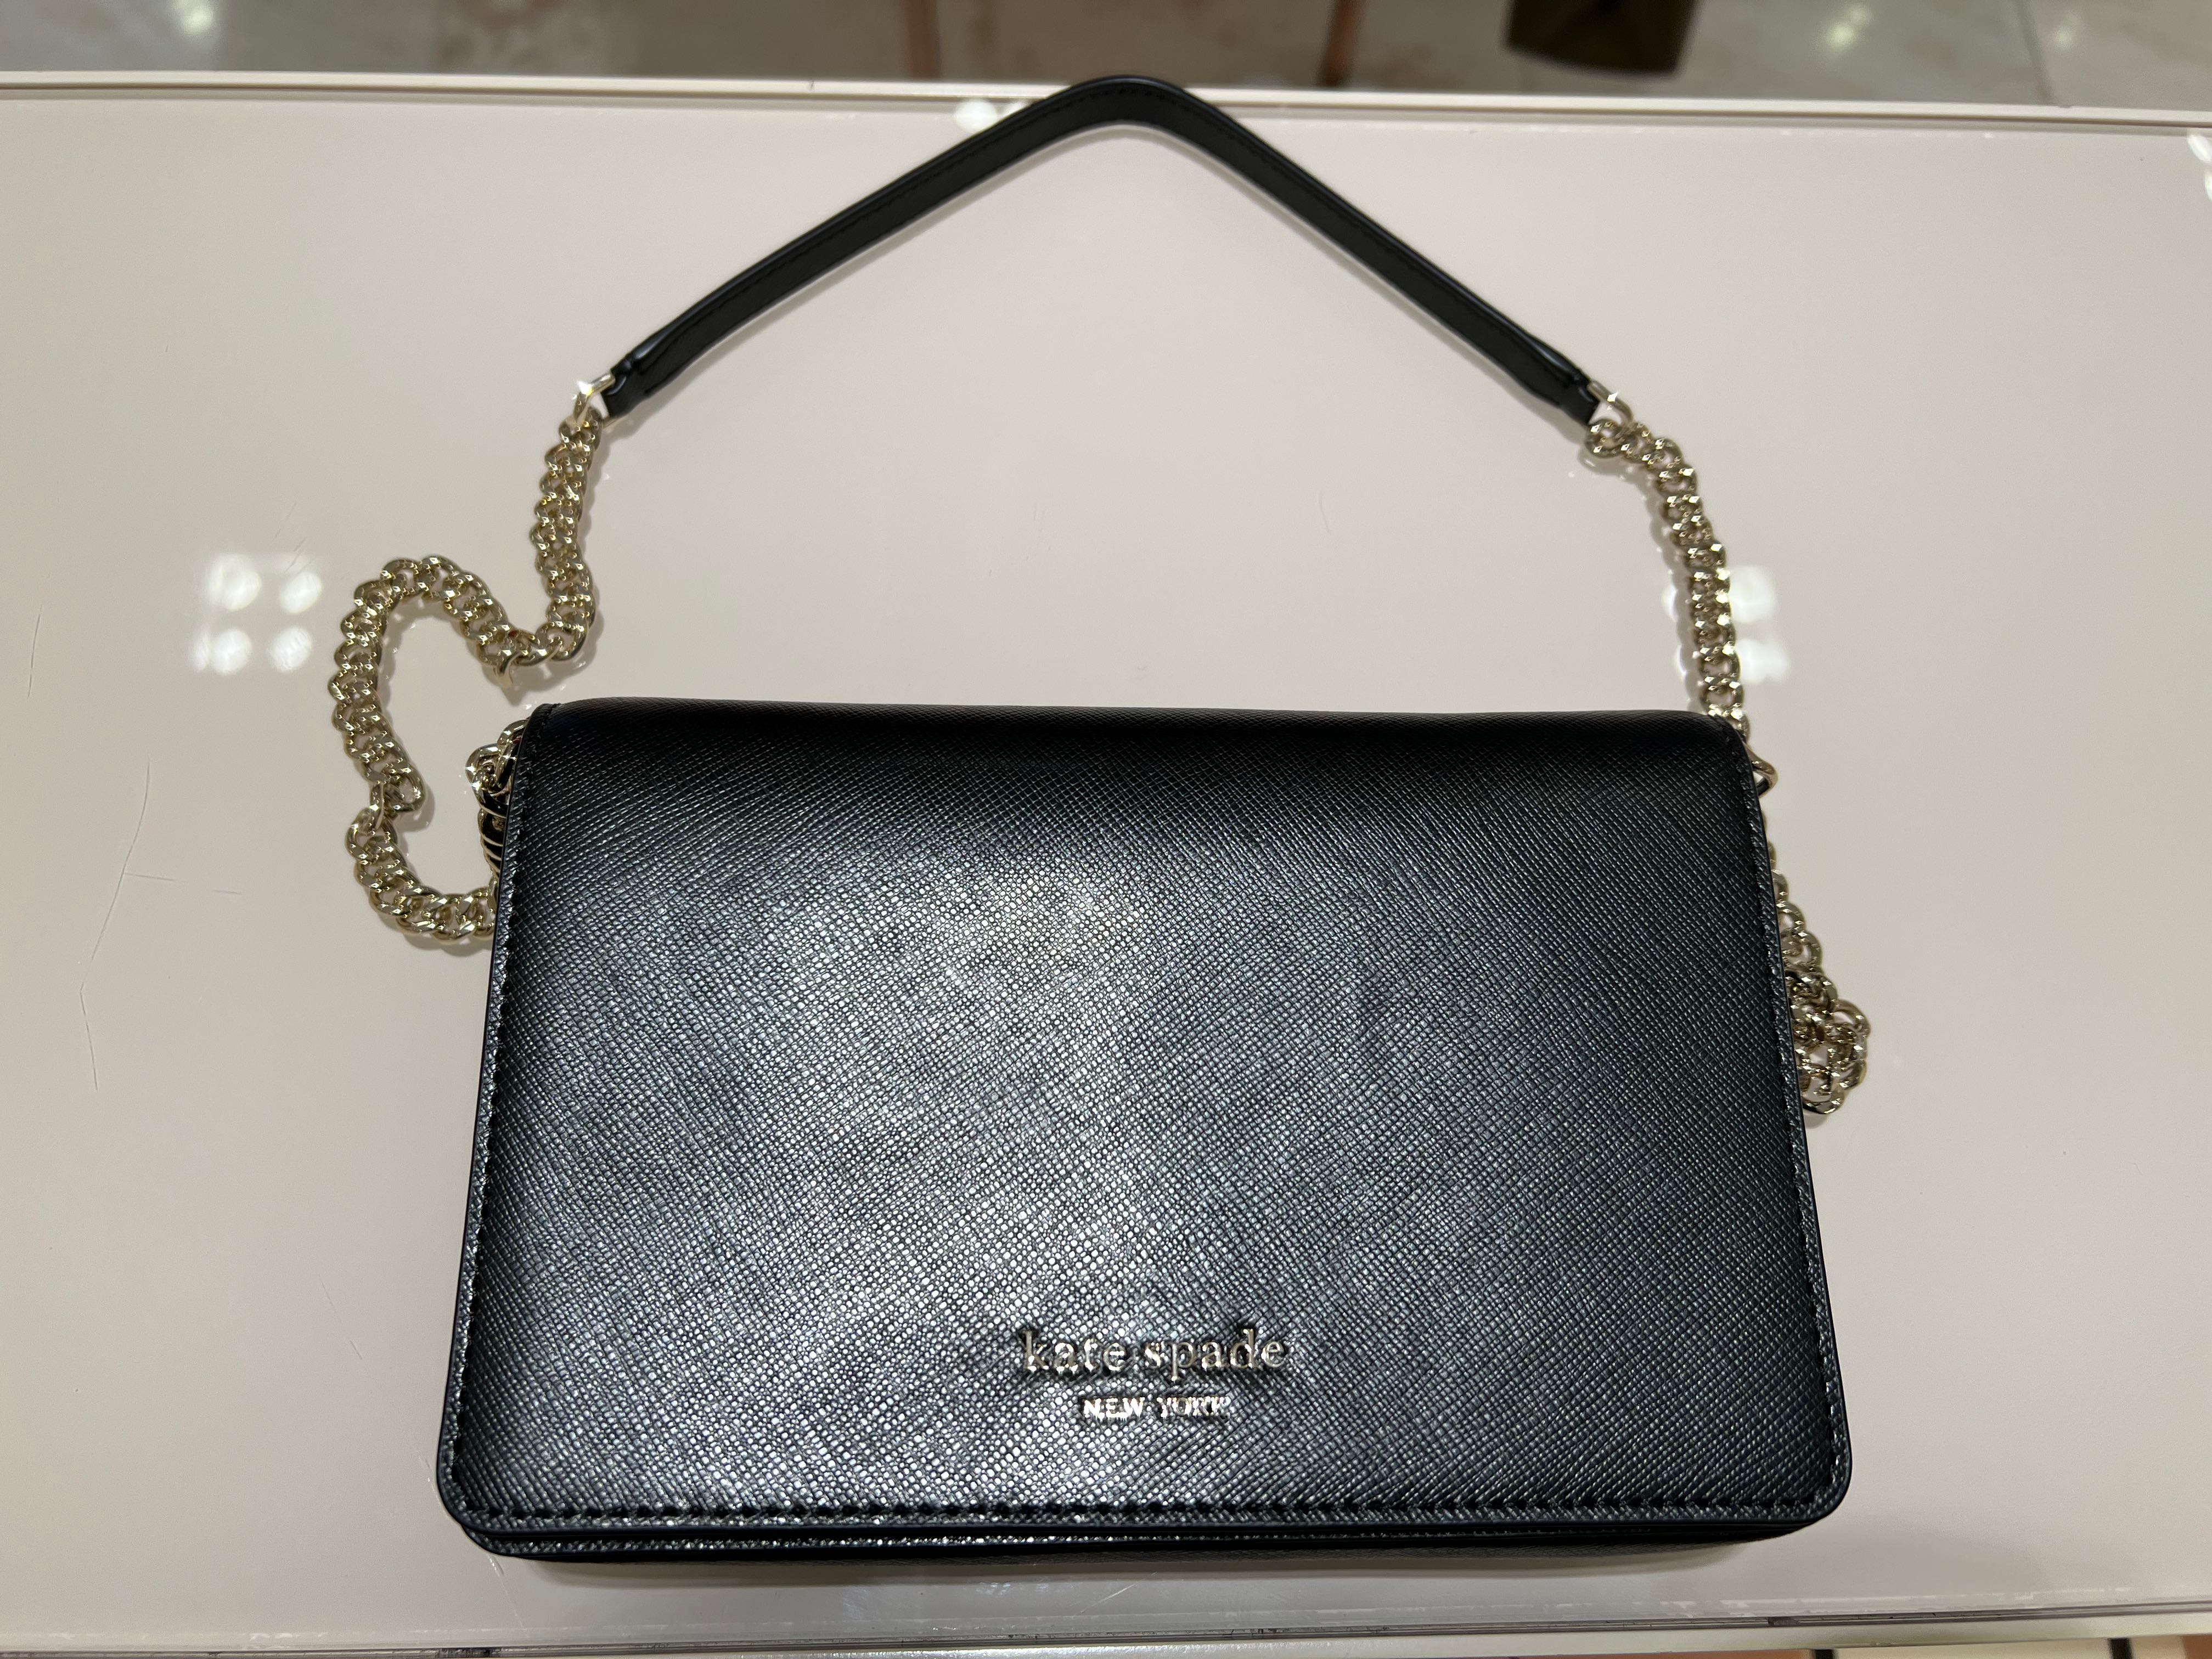 kate spade, Bags, Spencer Chain Wallet